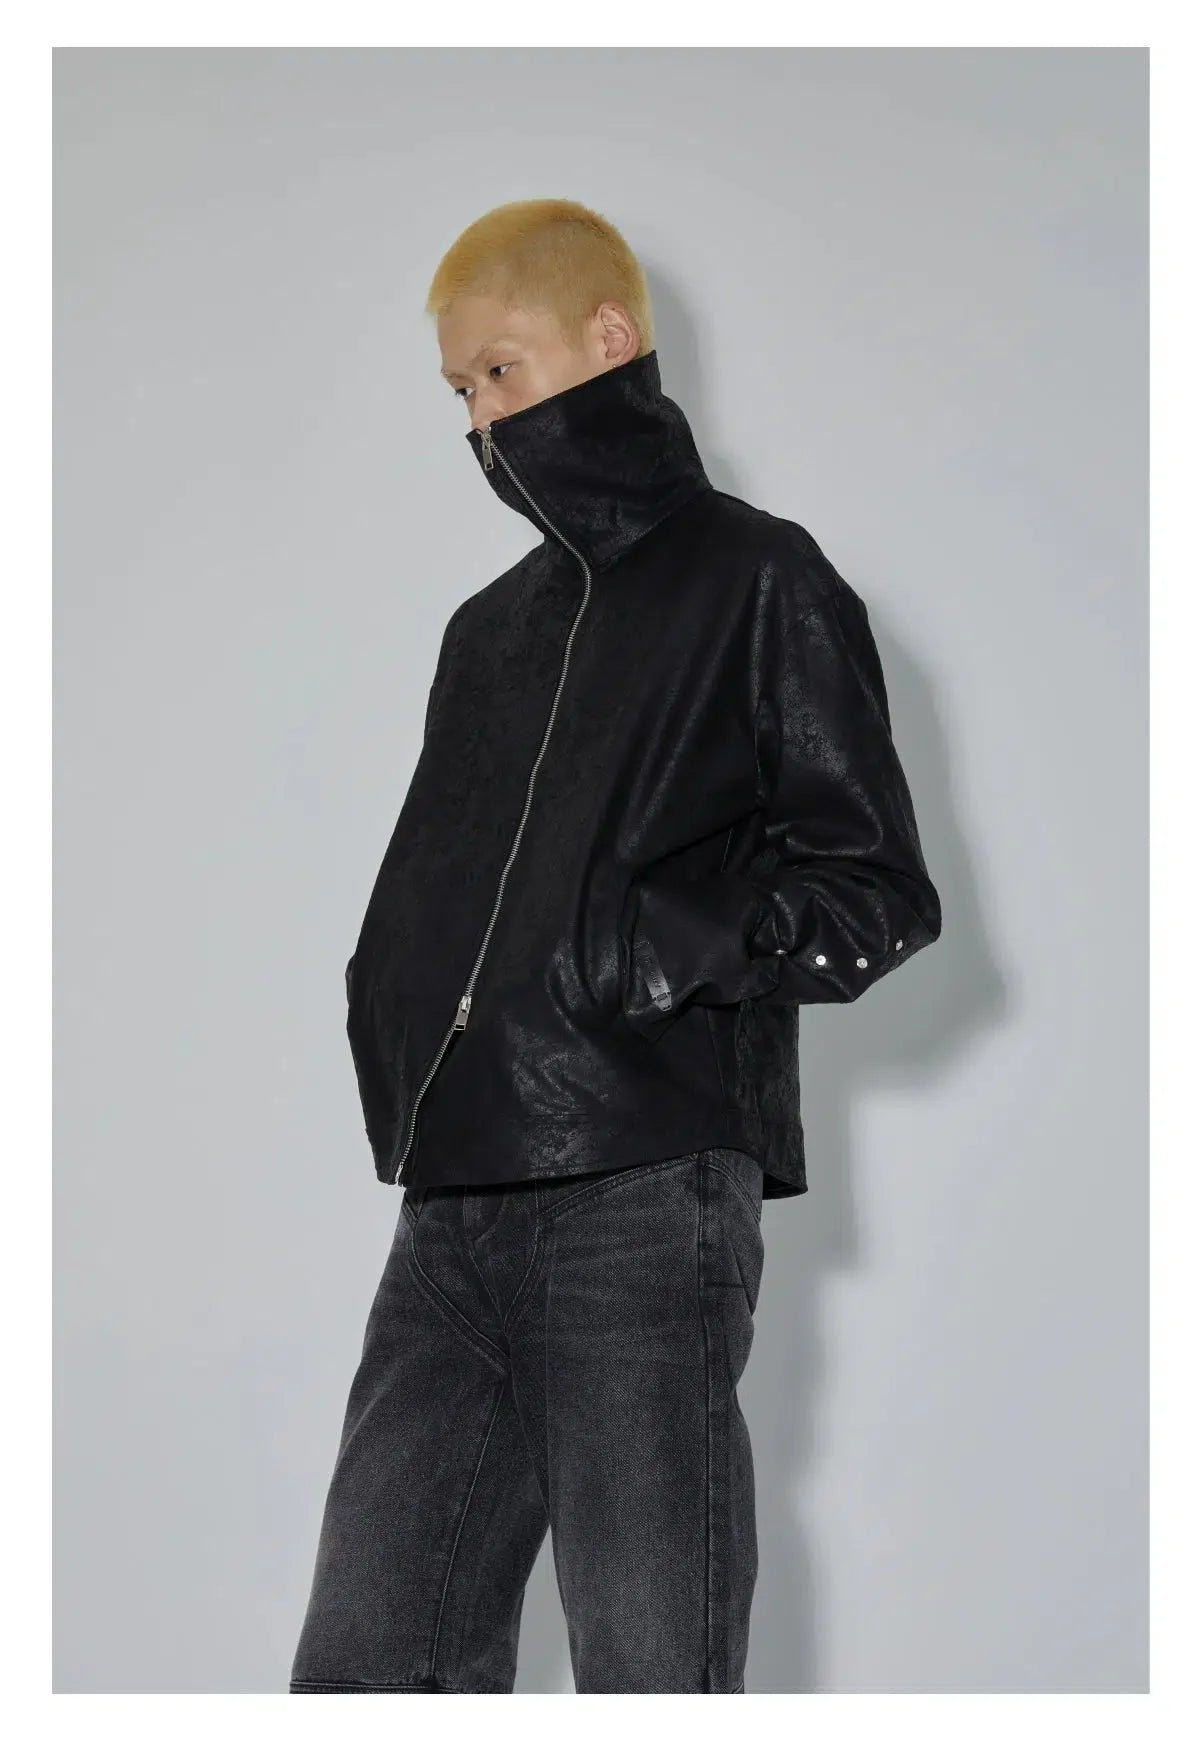 Zip-Up Faux Leather Jacket Korean Street Fashion Jacket By Apriority Shop Online at OH Vault